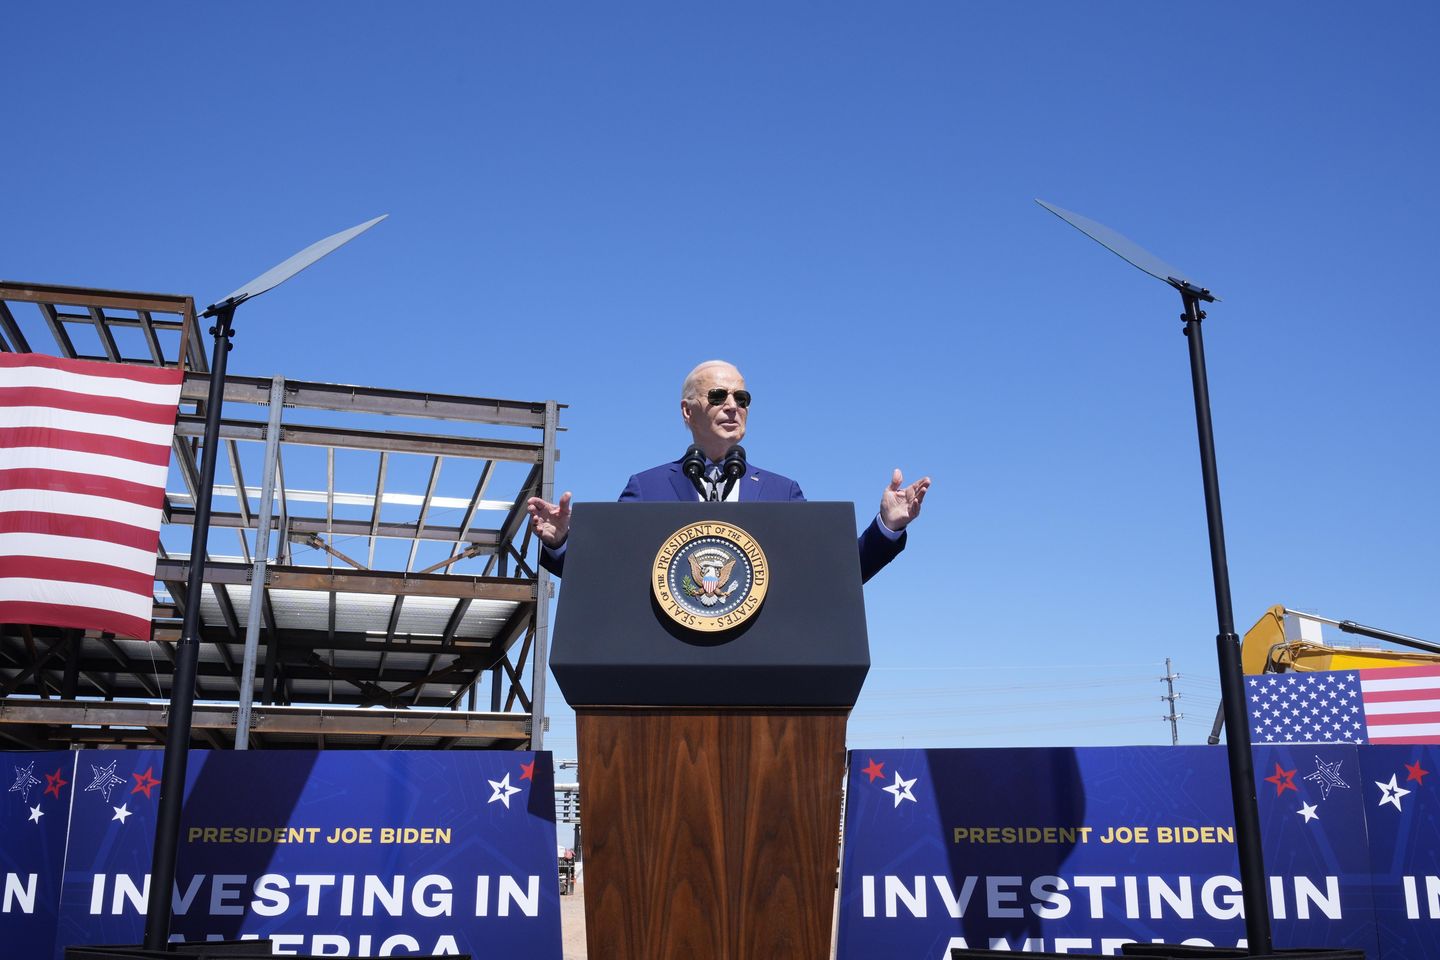 Trailing Trump, Biden woos Arizonans with old-school gimmick of doling out taxpayer-funded treats
